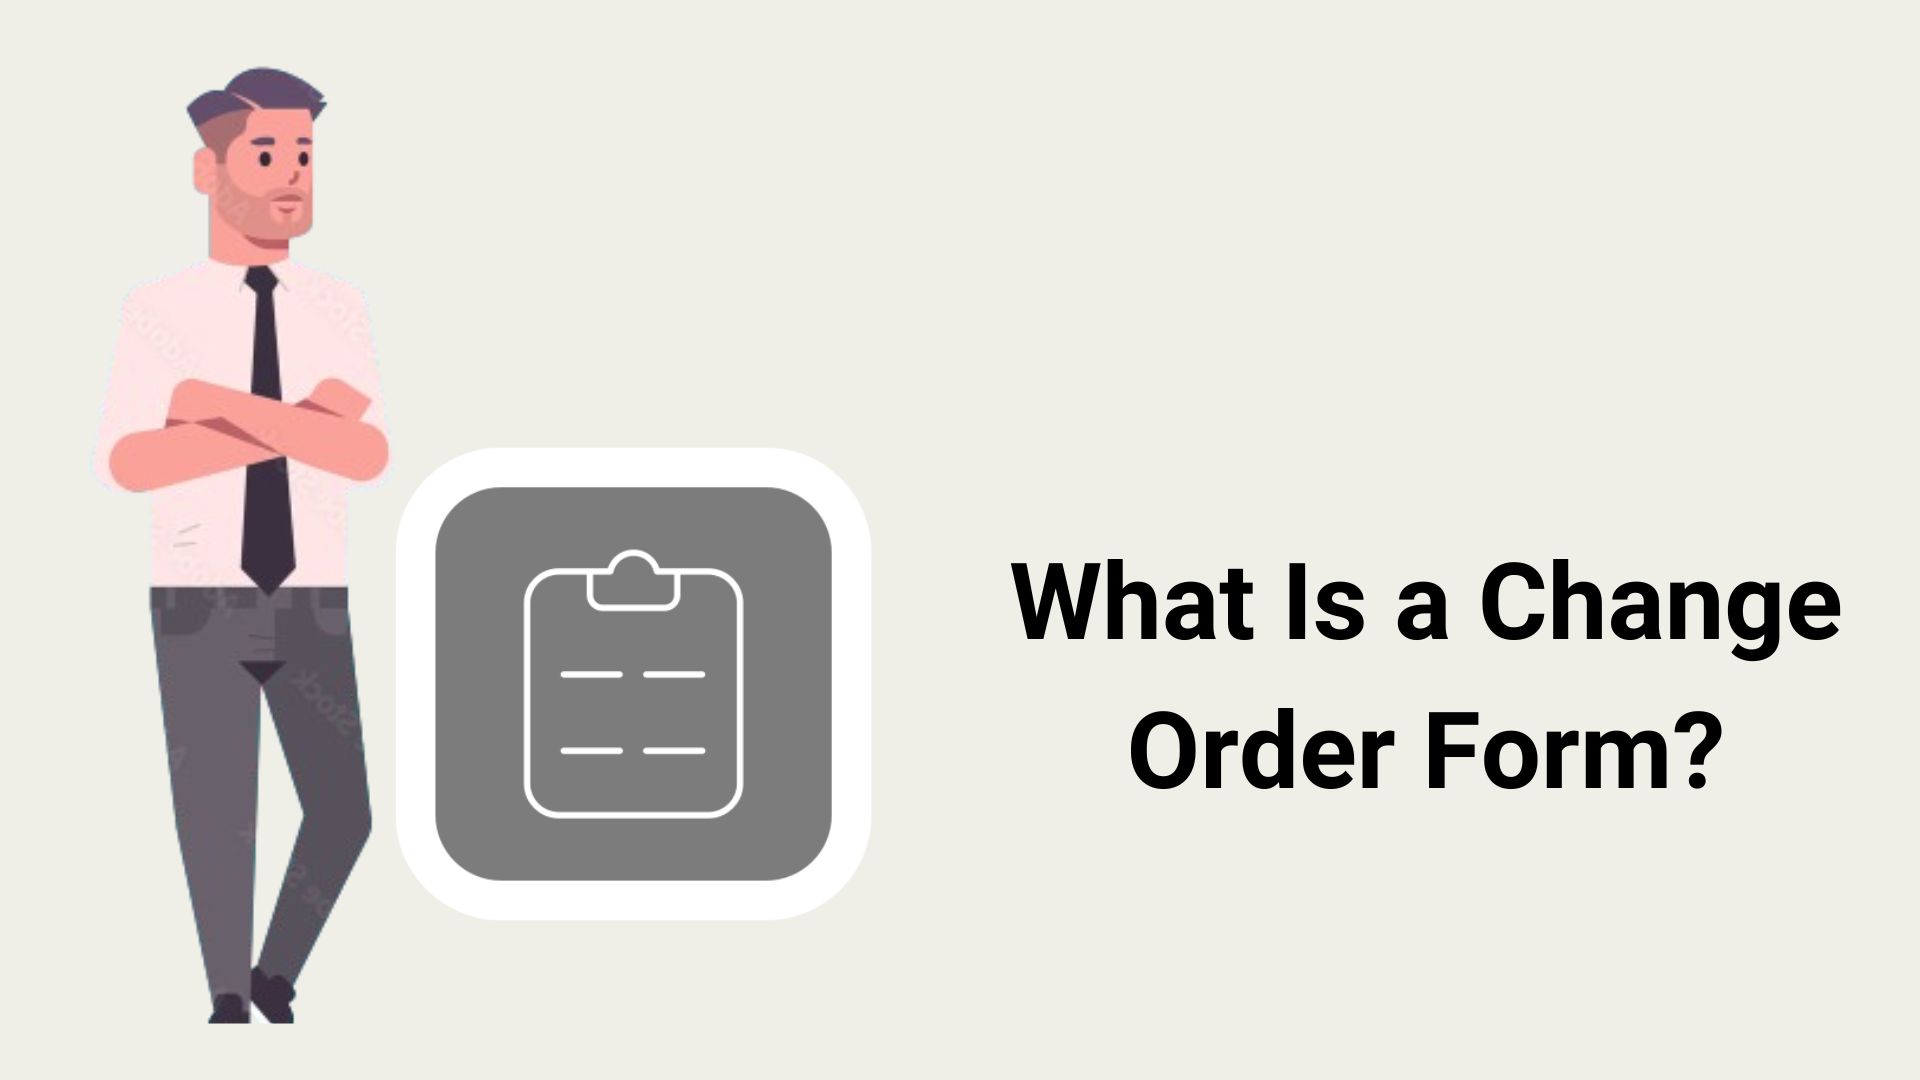 What Is a Change Order Form?